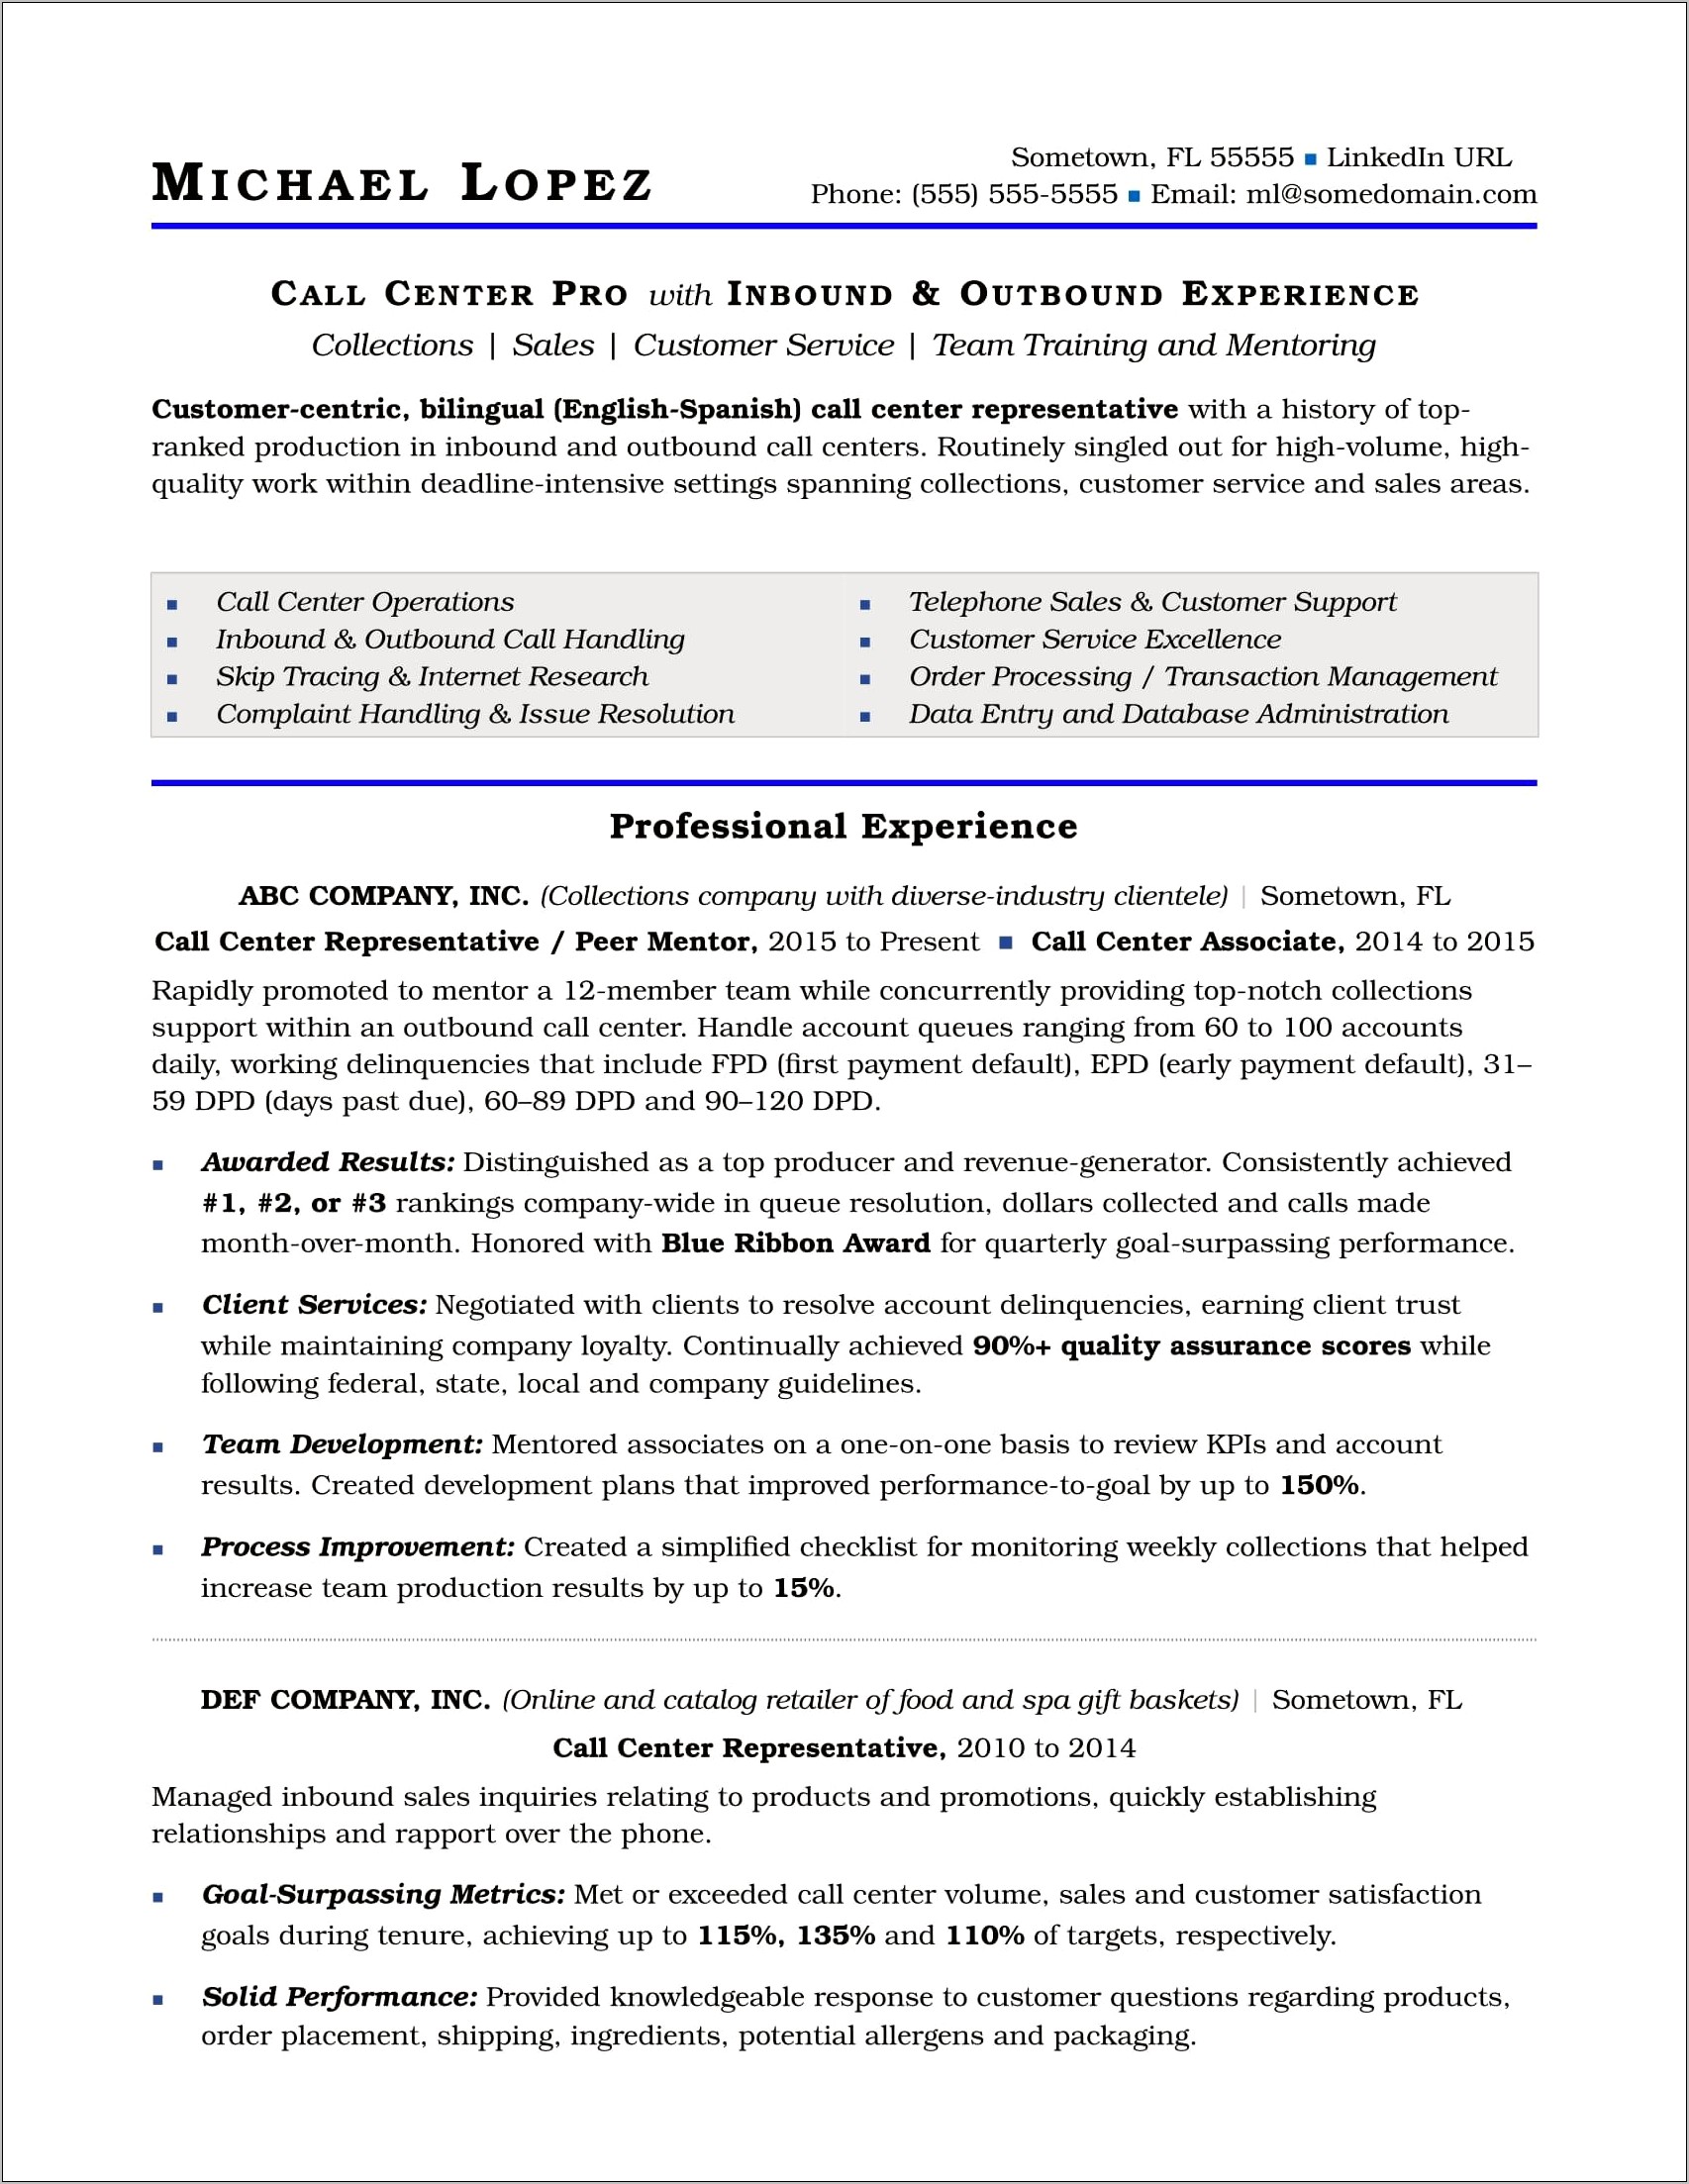 Skills From Call Center To Put On Resume